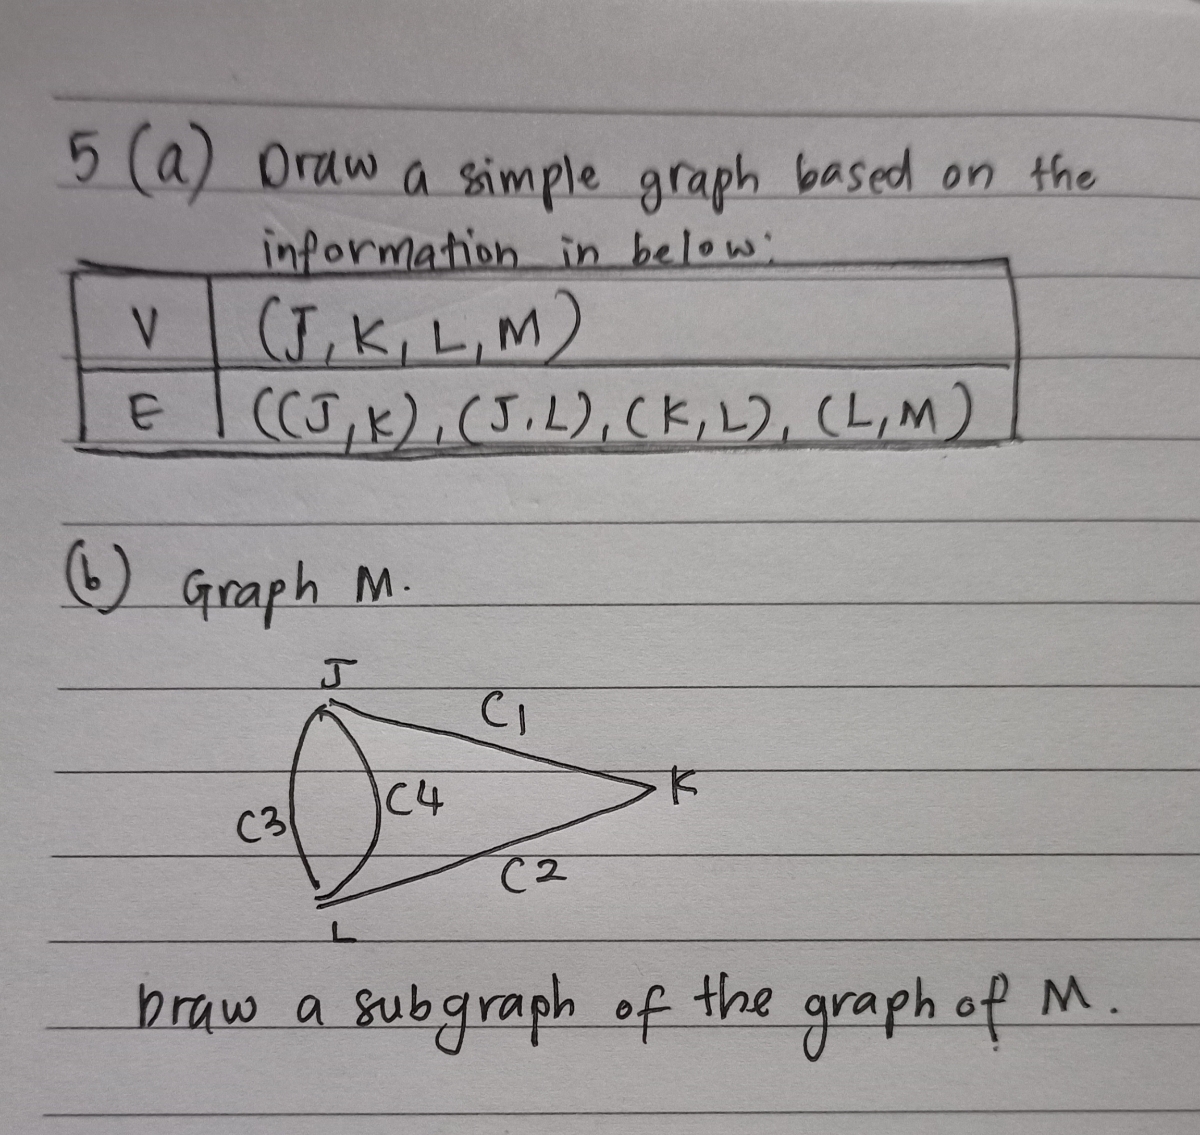 Answered 5 A Oraw A Simple Graph Based On The Bartleby